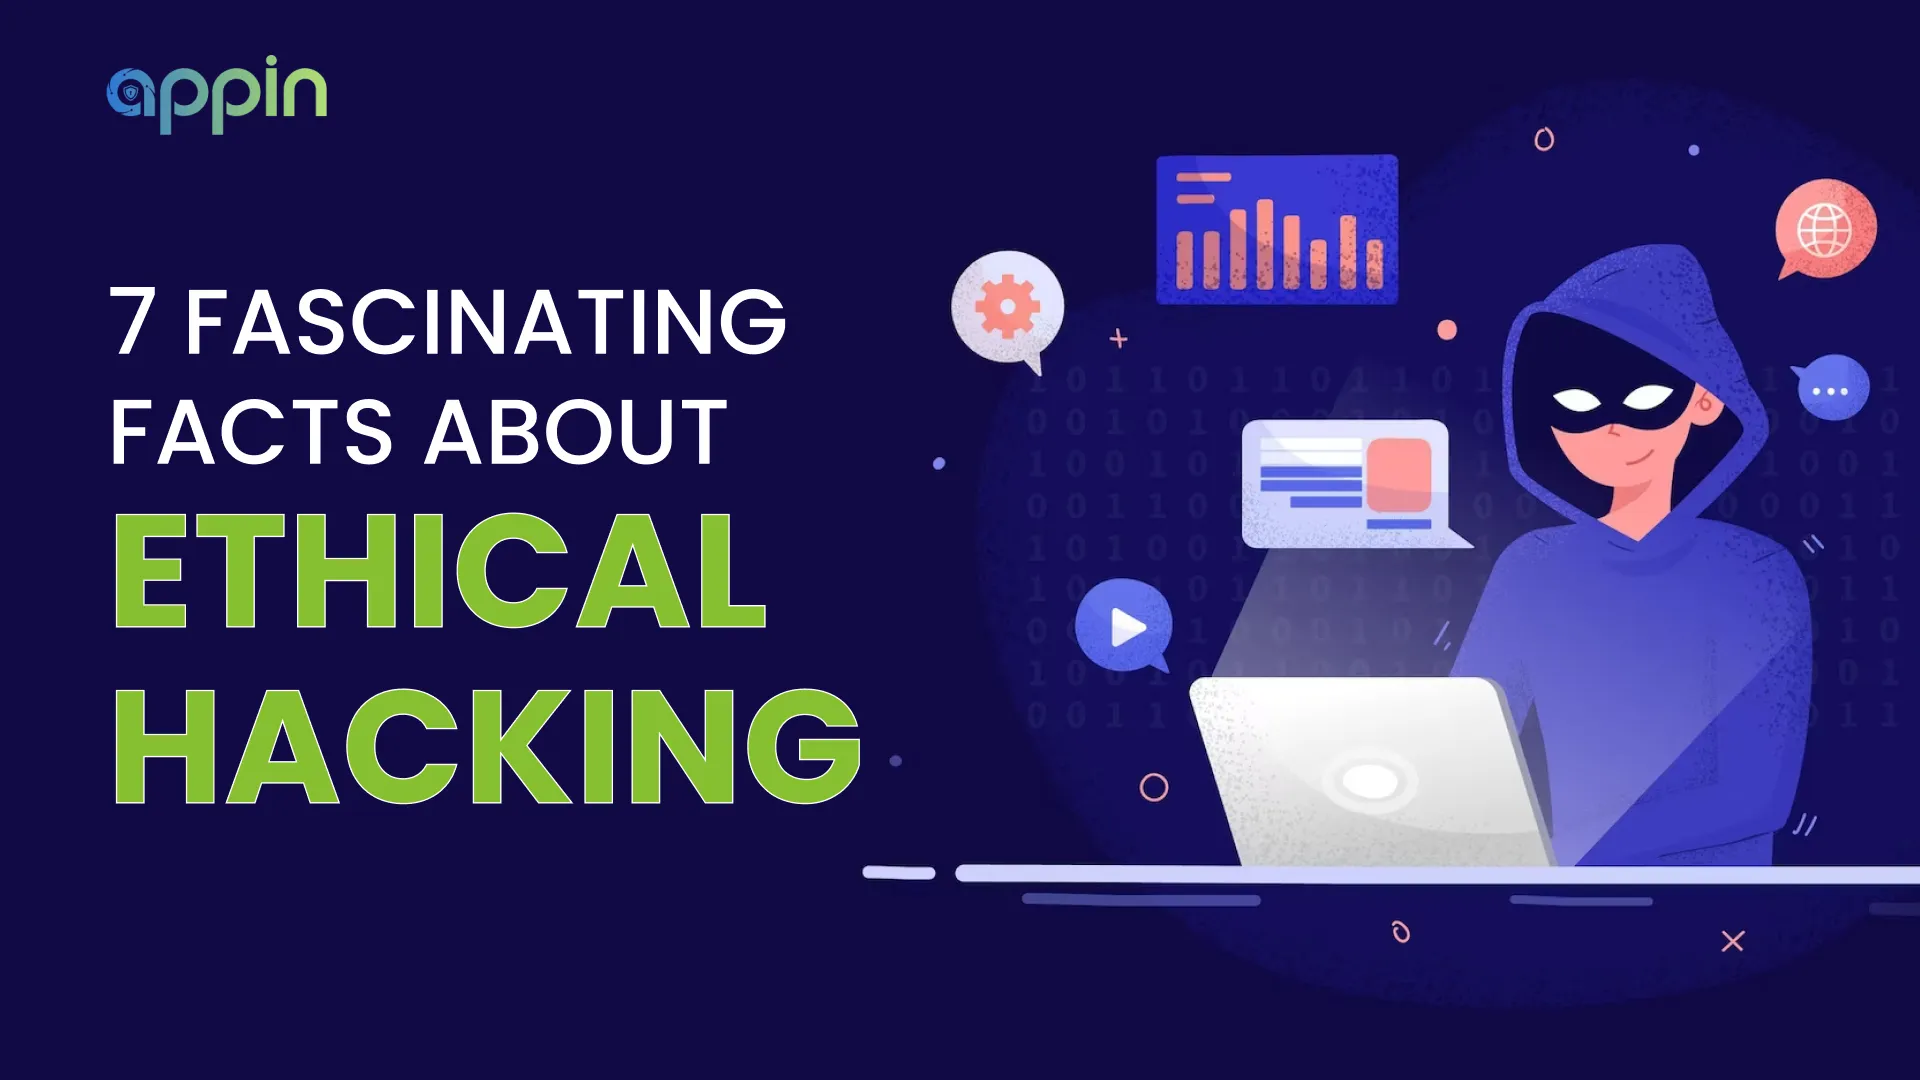 7 Fascinating facts about ethical hacking